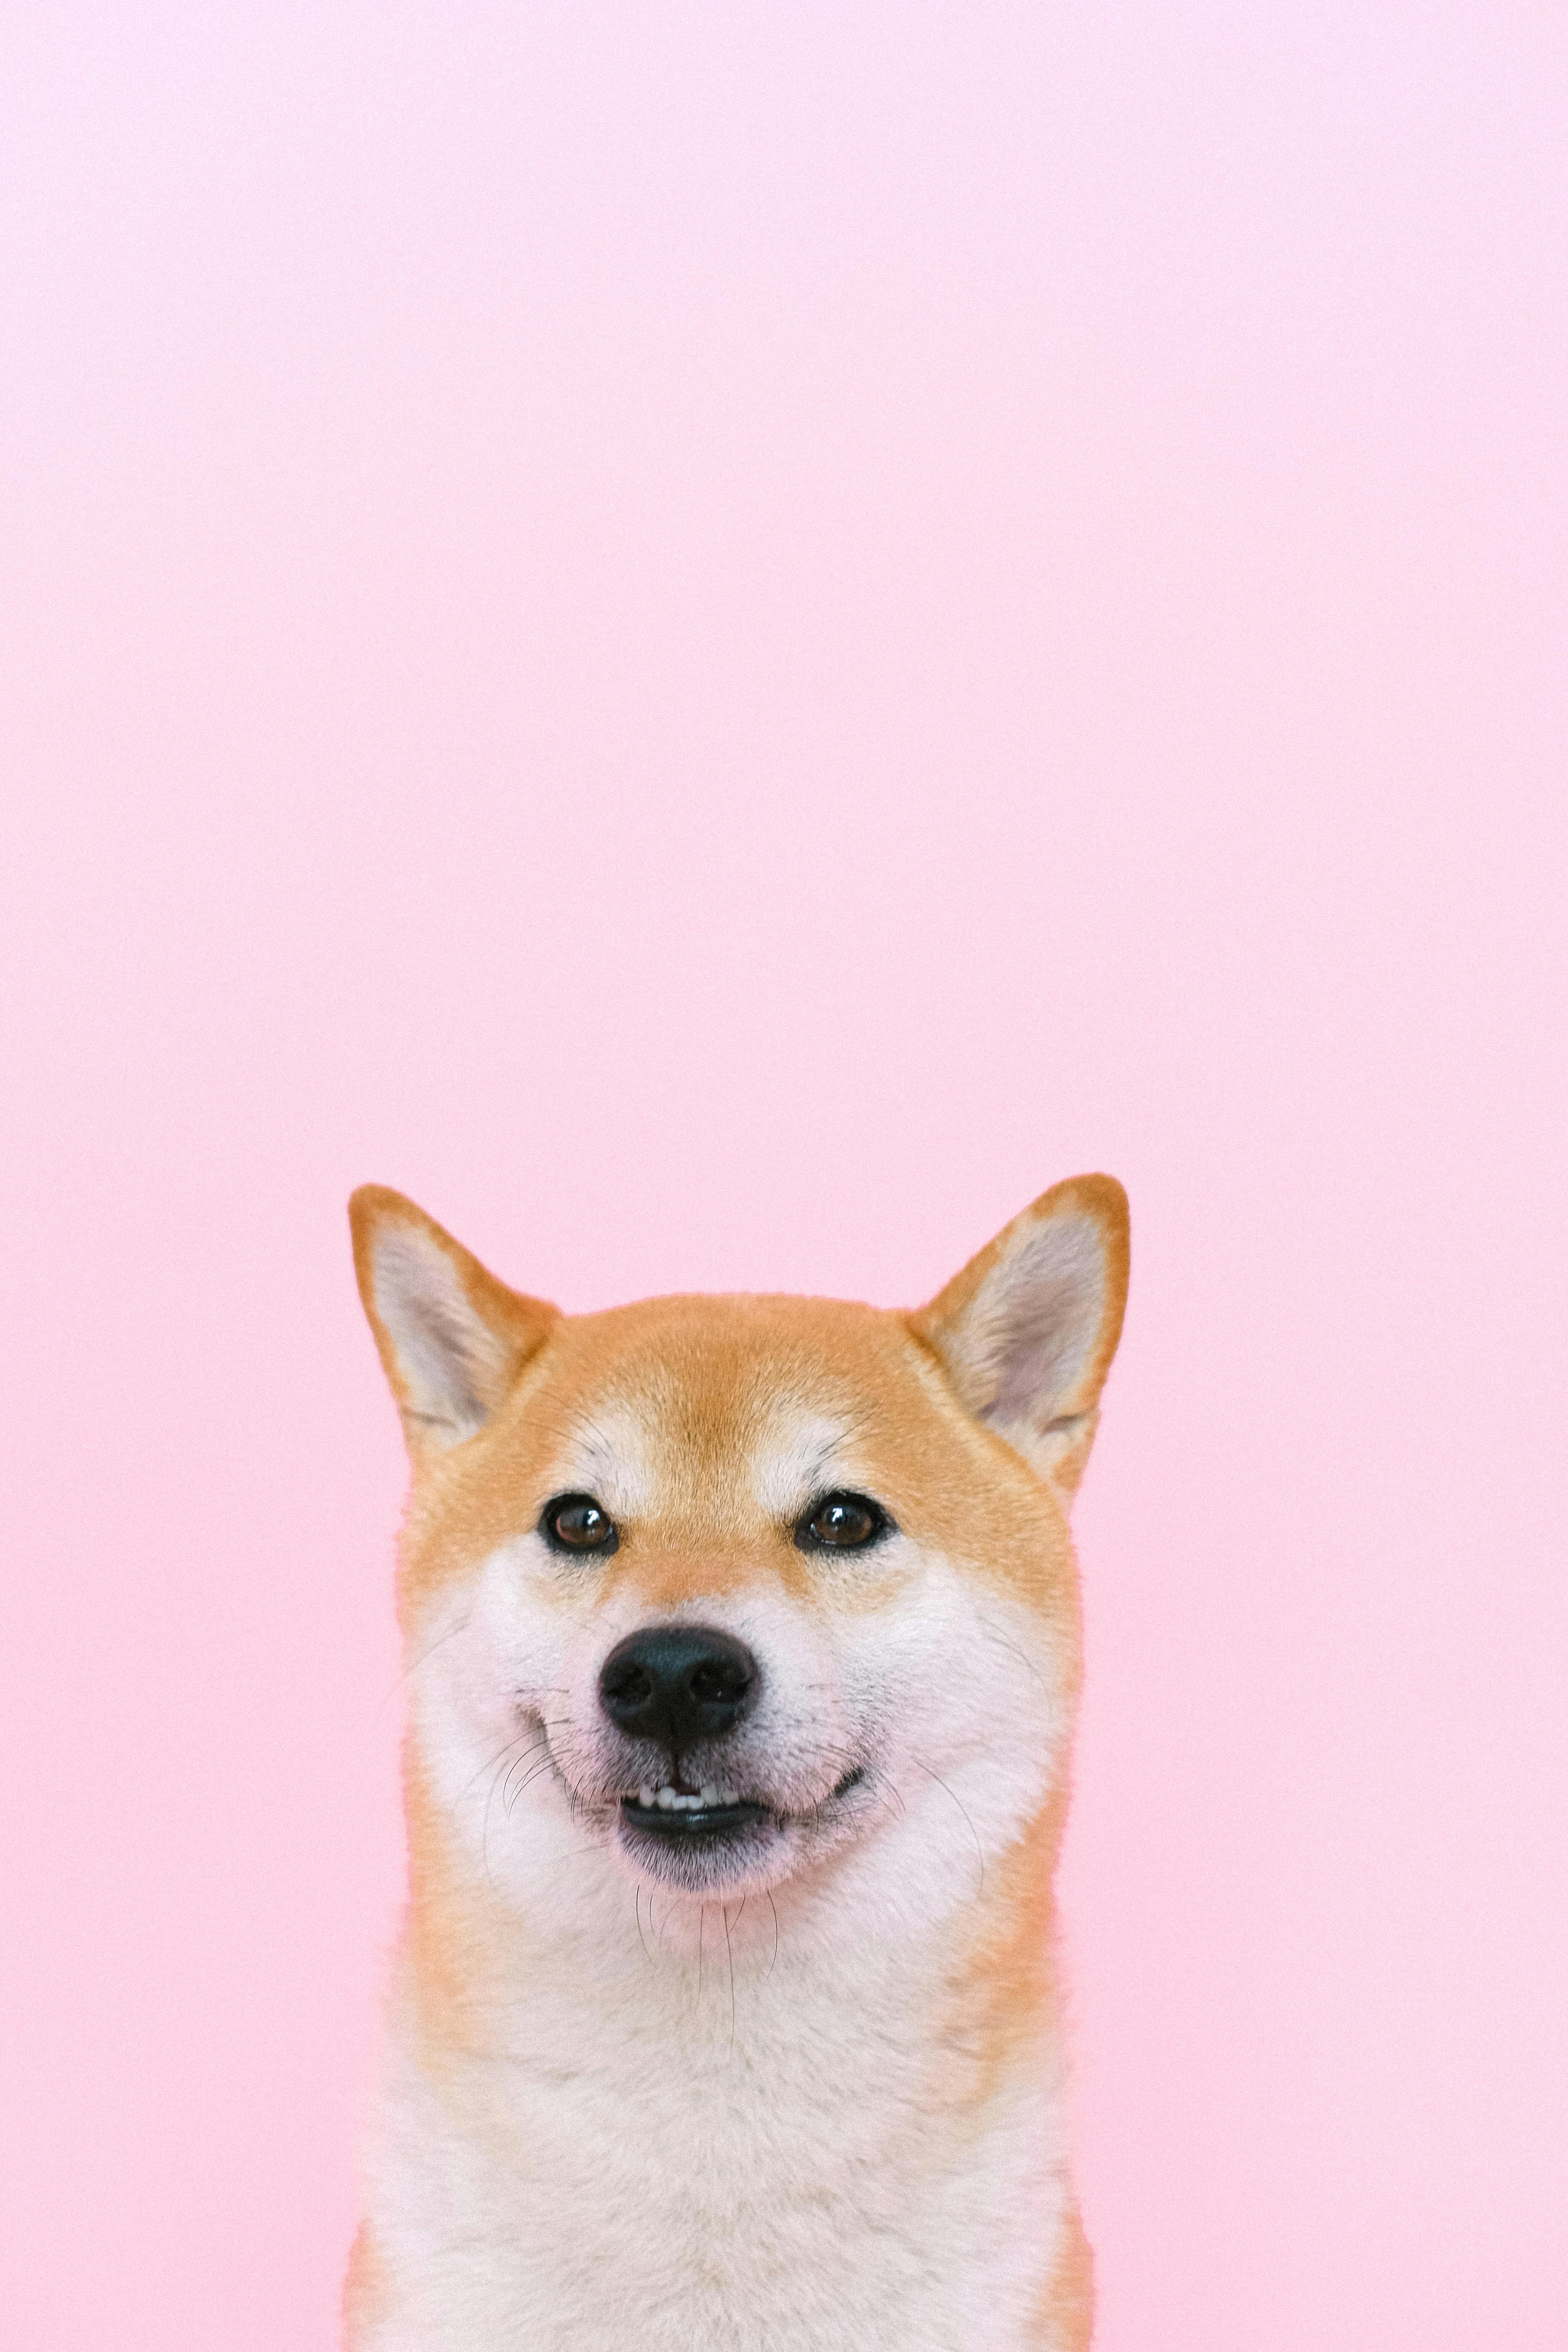 1000 Shiba Inu Pictures  Download Free Images on Unsplash